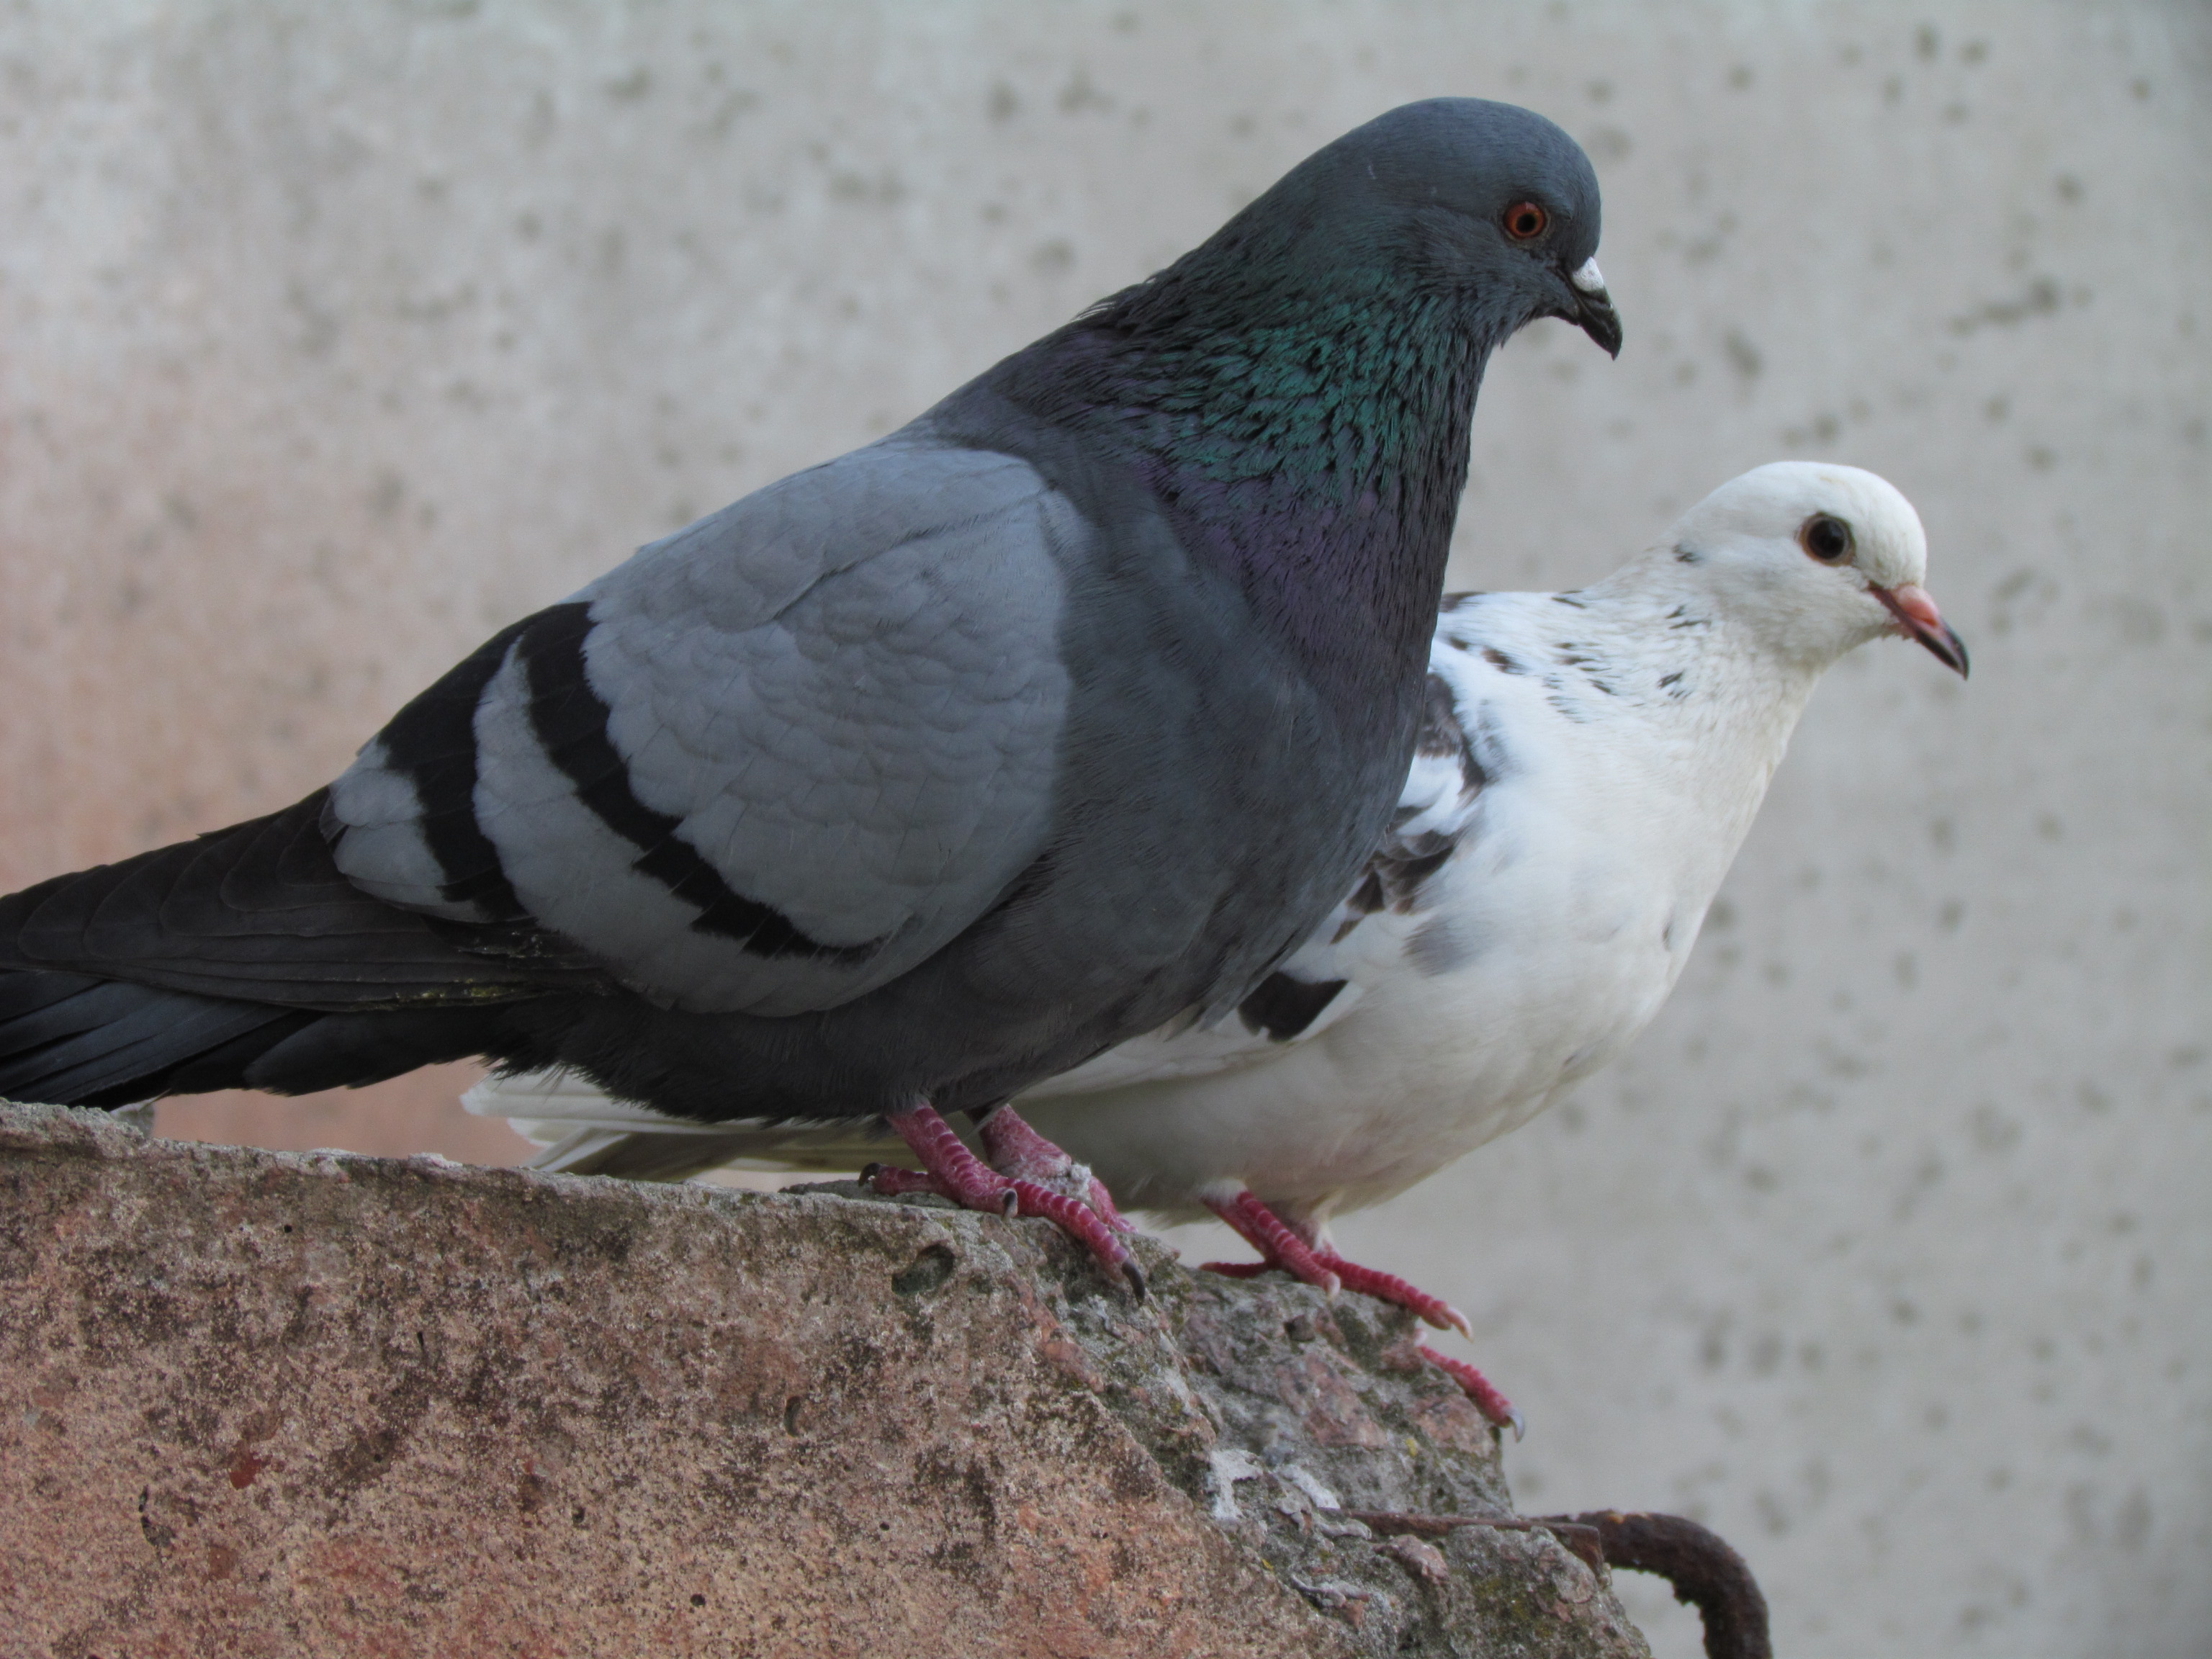 Peculiarities of behavior and lifestyle of domestic pigeons